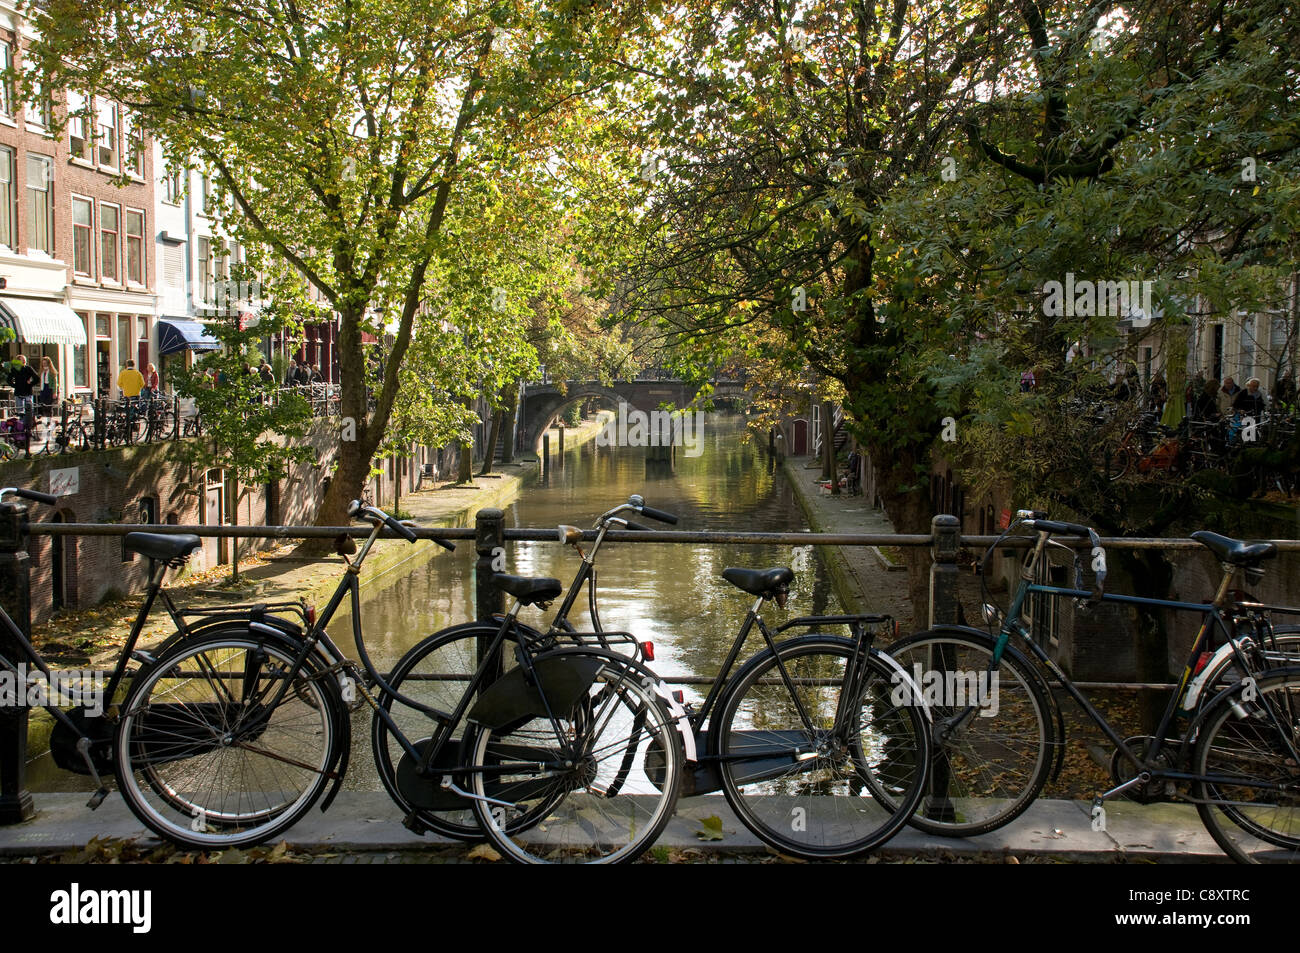 Bikes resting on the side of a canal in the Netherlands Stock Photo